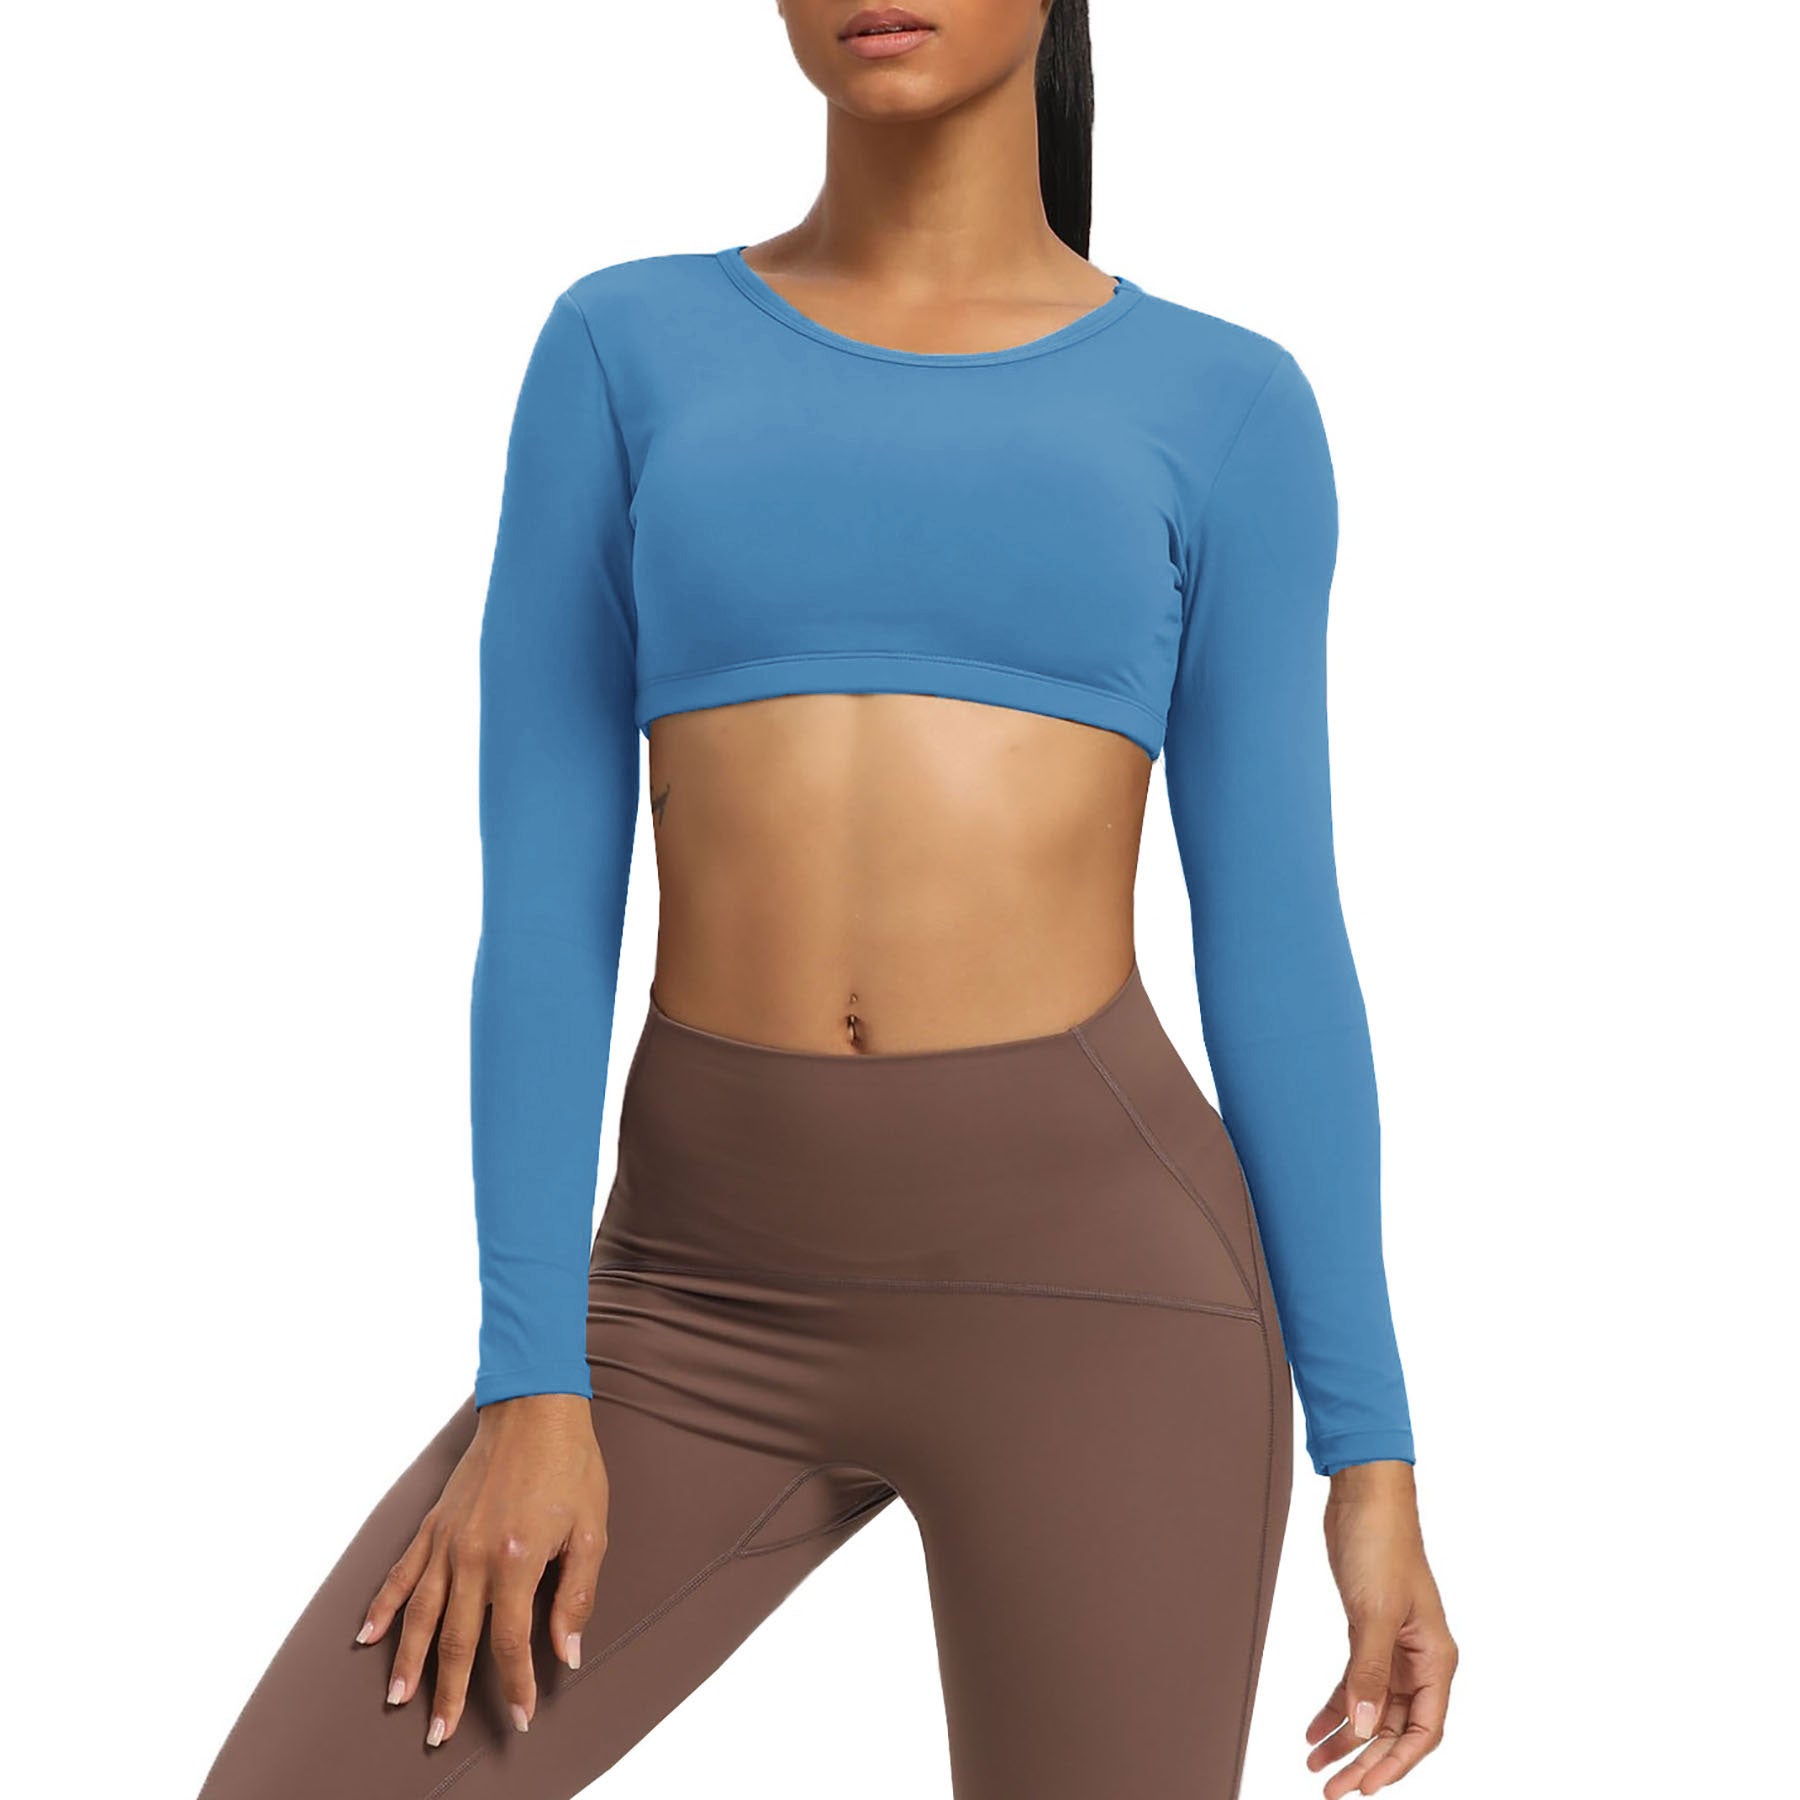 Aoxjox "Hollow Back" Long Sleeve Crop